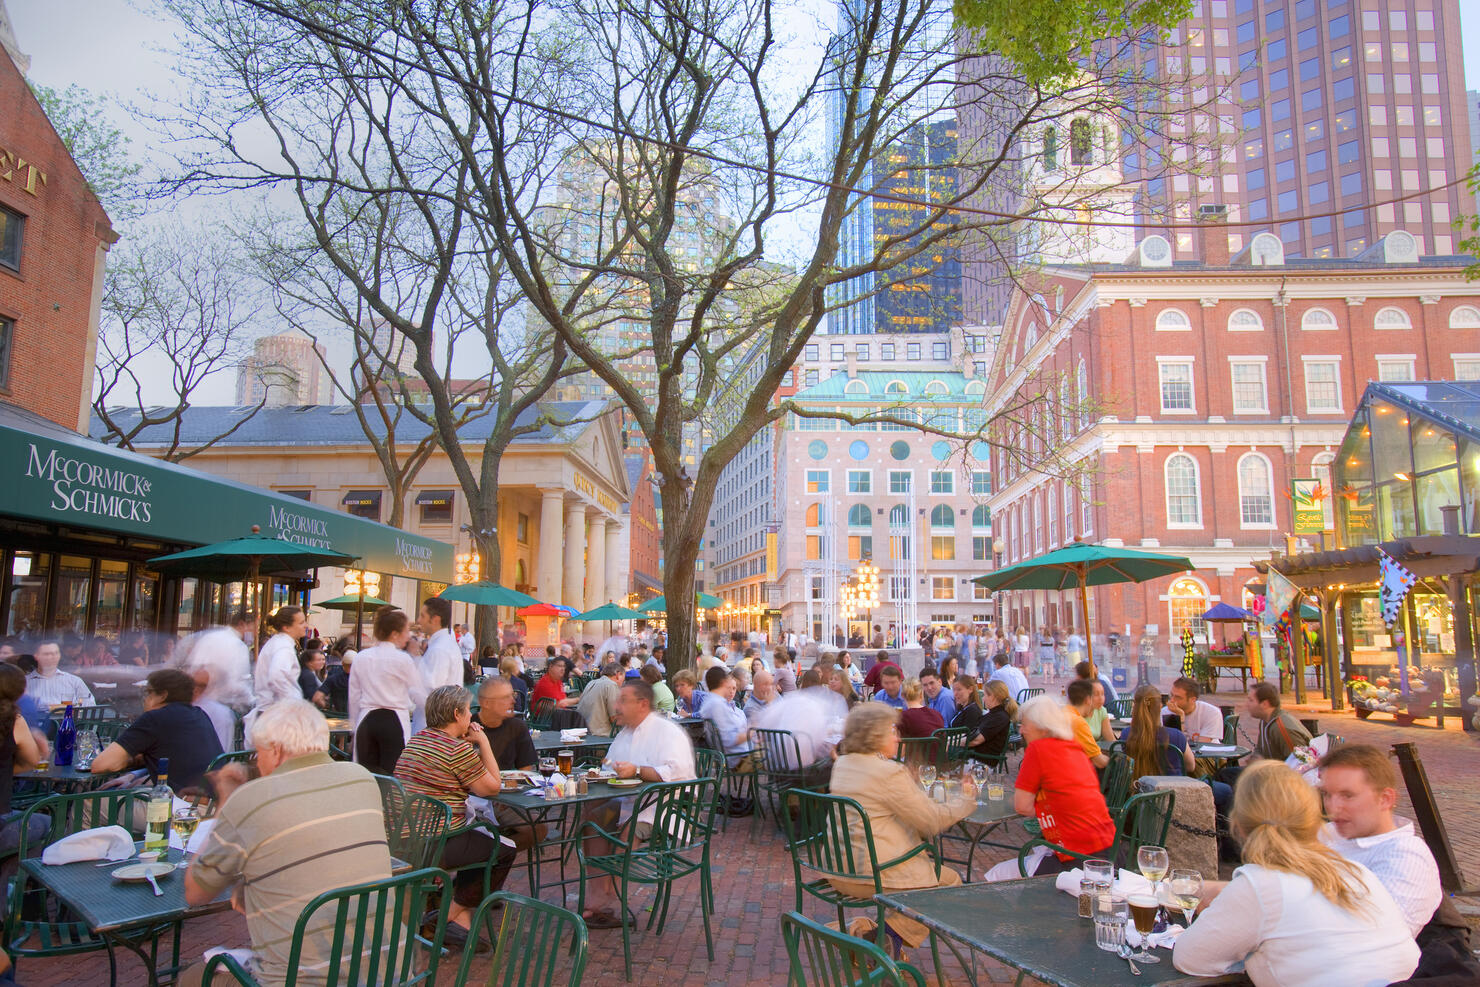 People having breakfast at pavement cafT, Faneuil hall in background